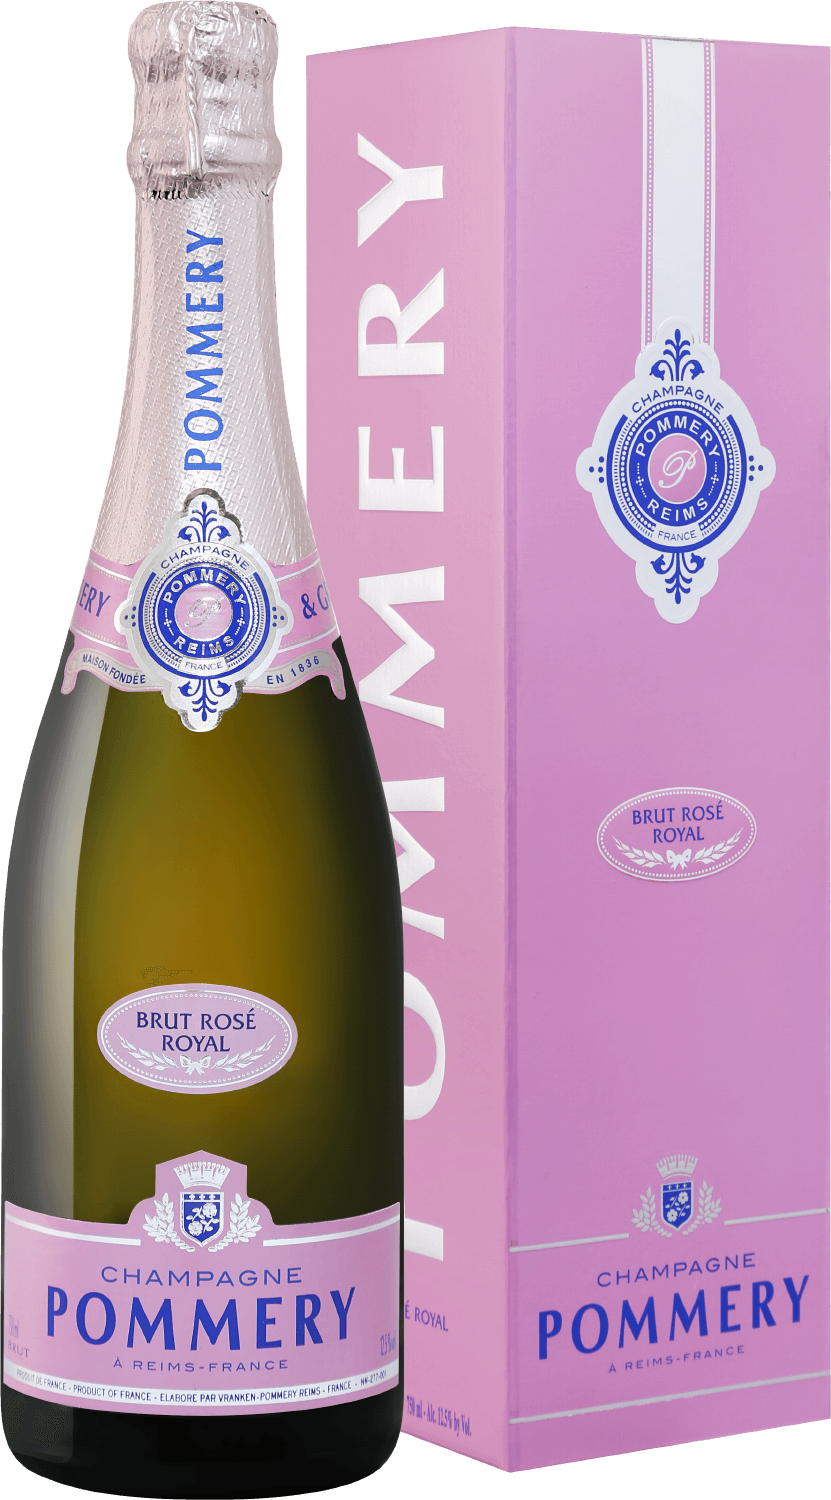 Pommery Brut Rose Royal Champagne AOP (gift box) drappier carte d’or brut champagne aop in gift box with two glasses